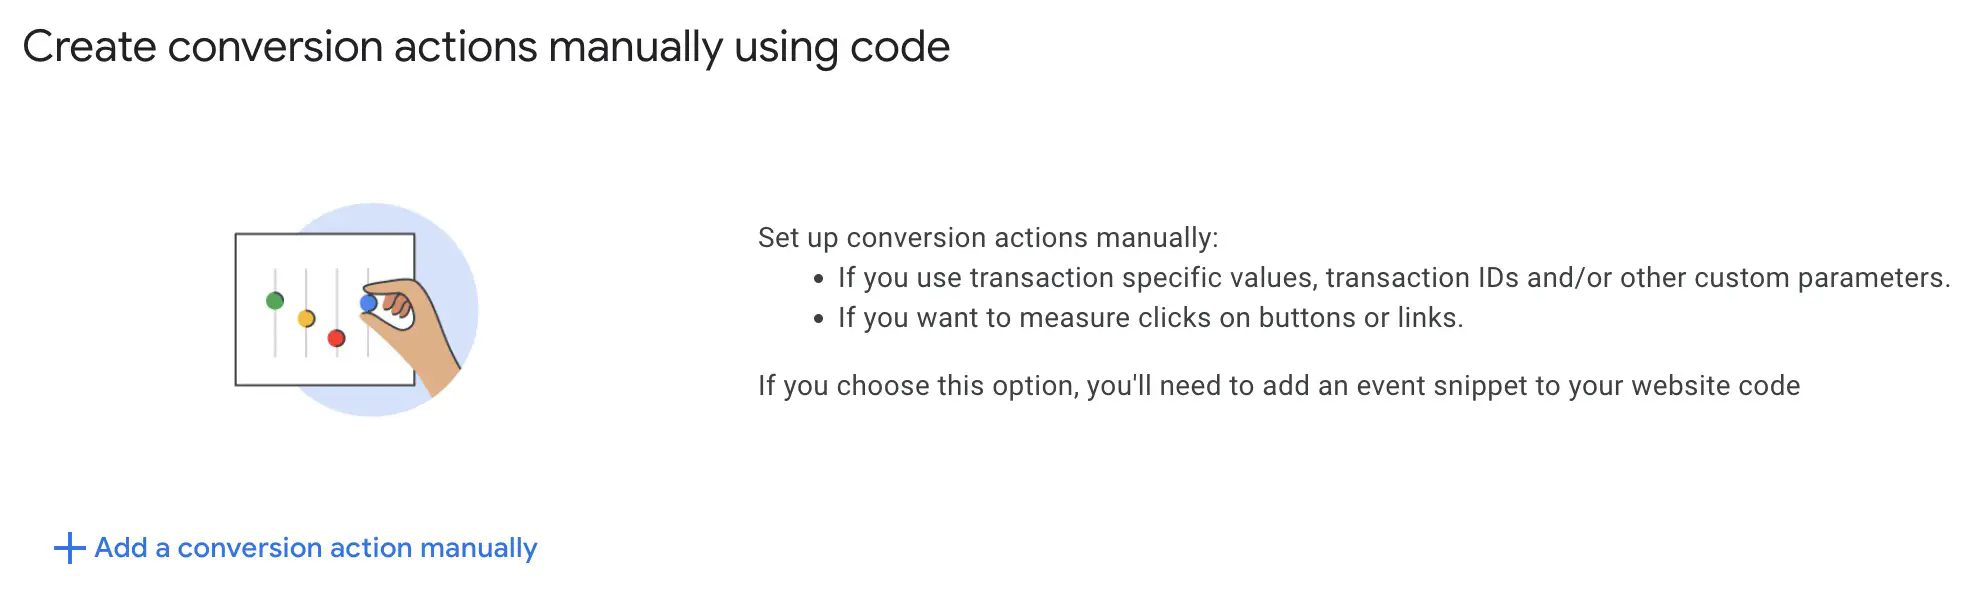 Add a conversion action manually on Google Ads